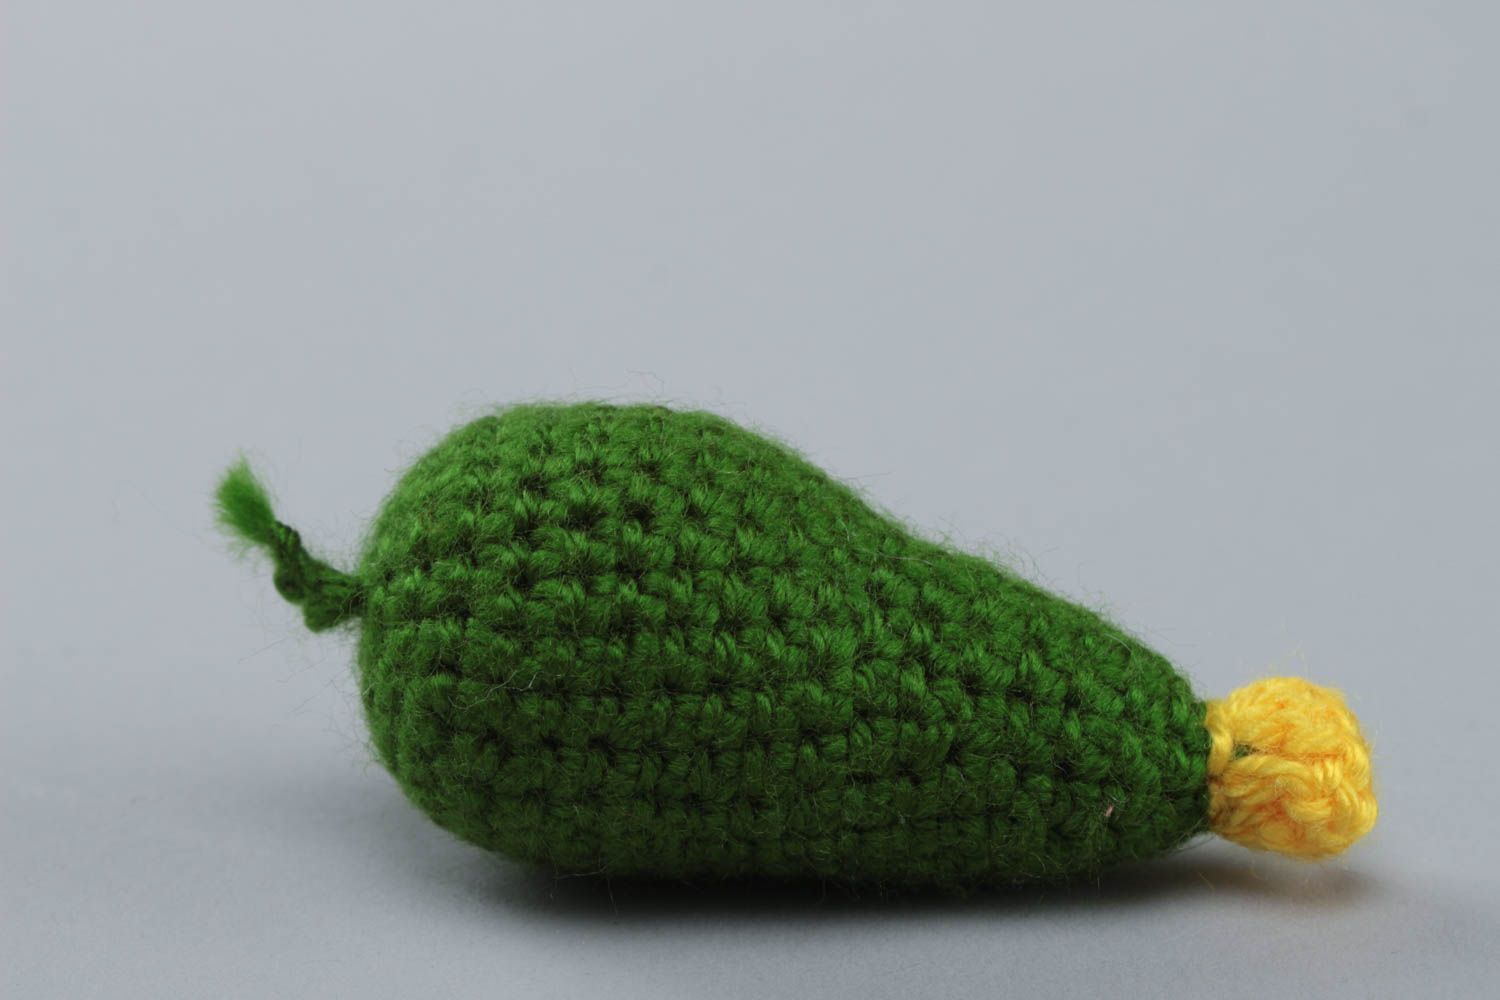 Handmade small acrylic crochet soft toy green cucumber for kids and interior decor photo 2